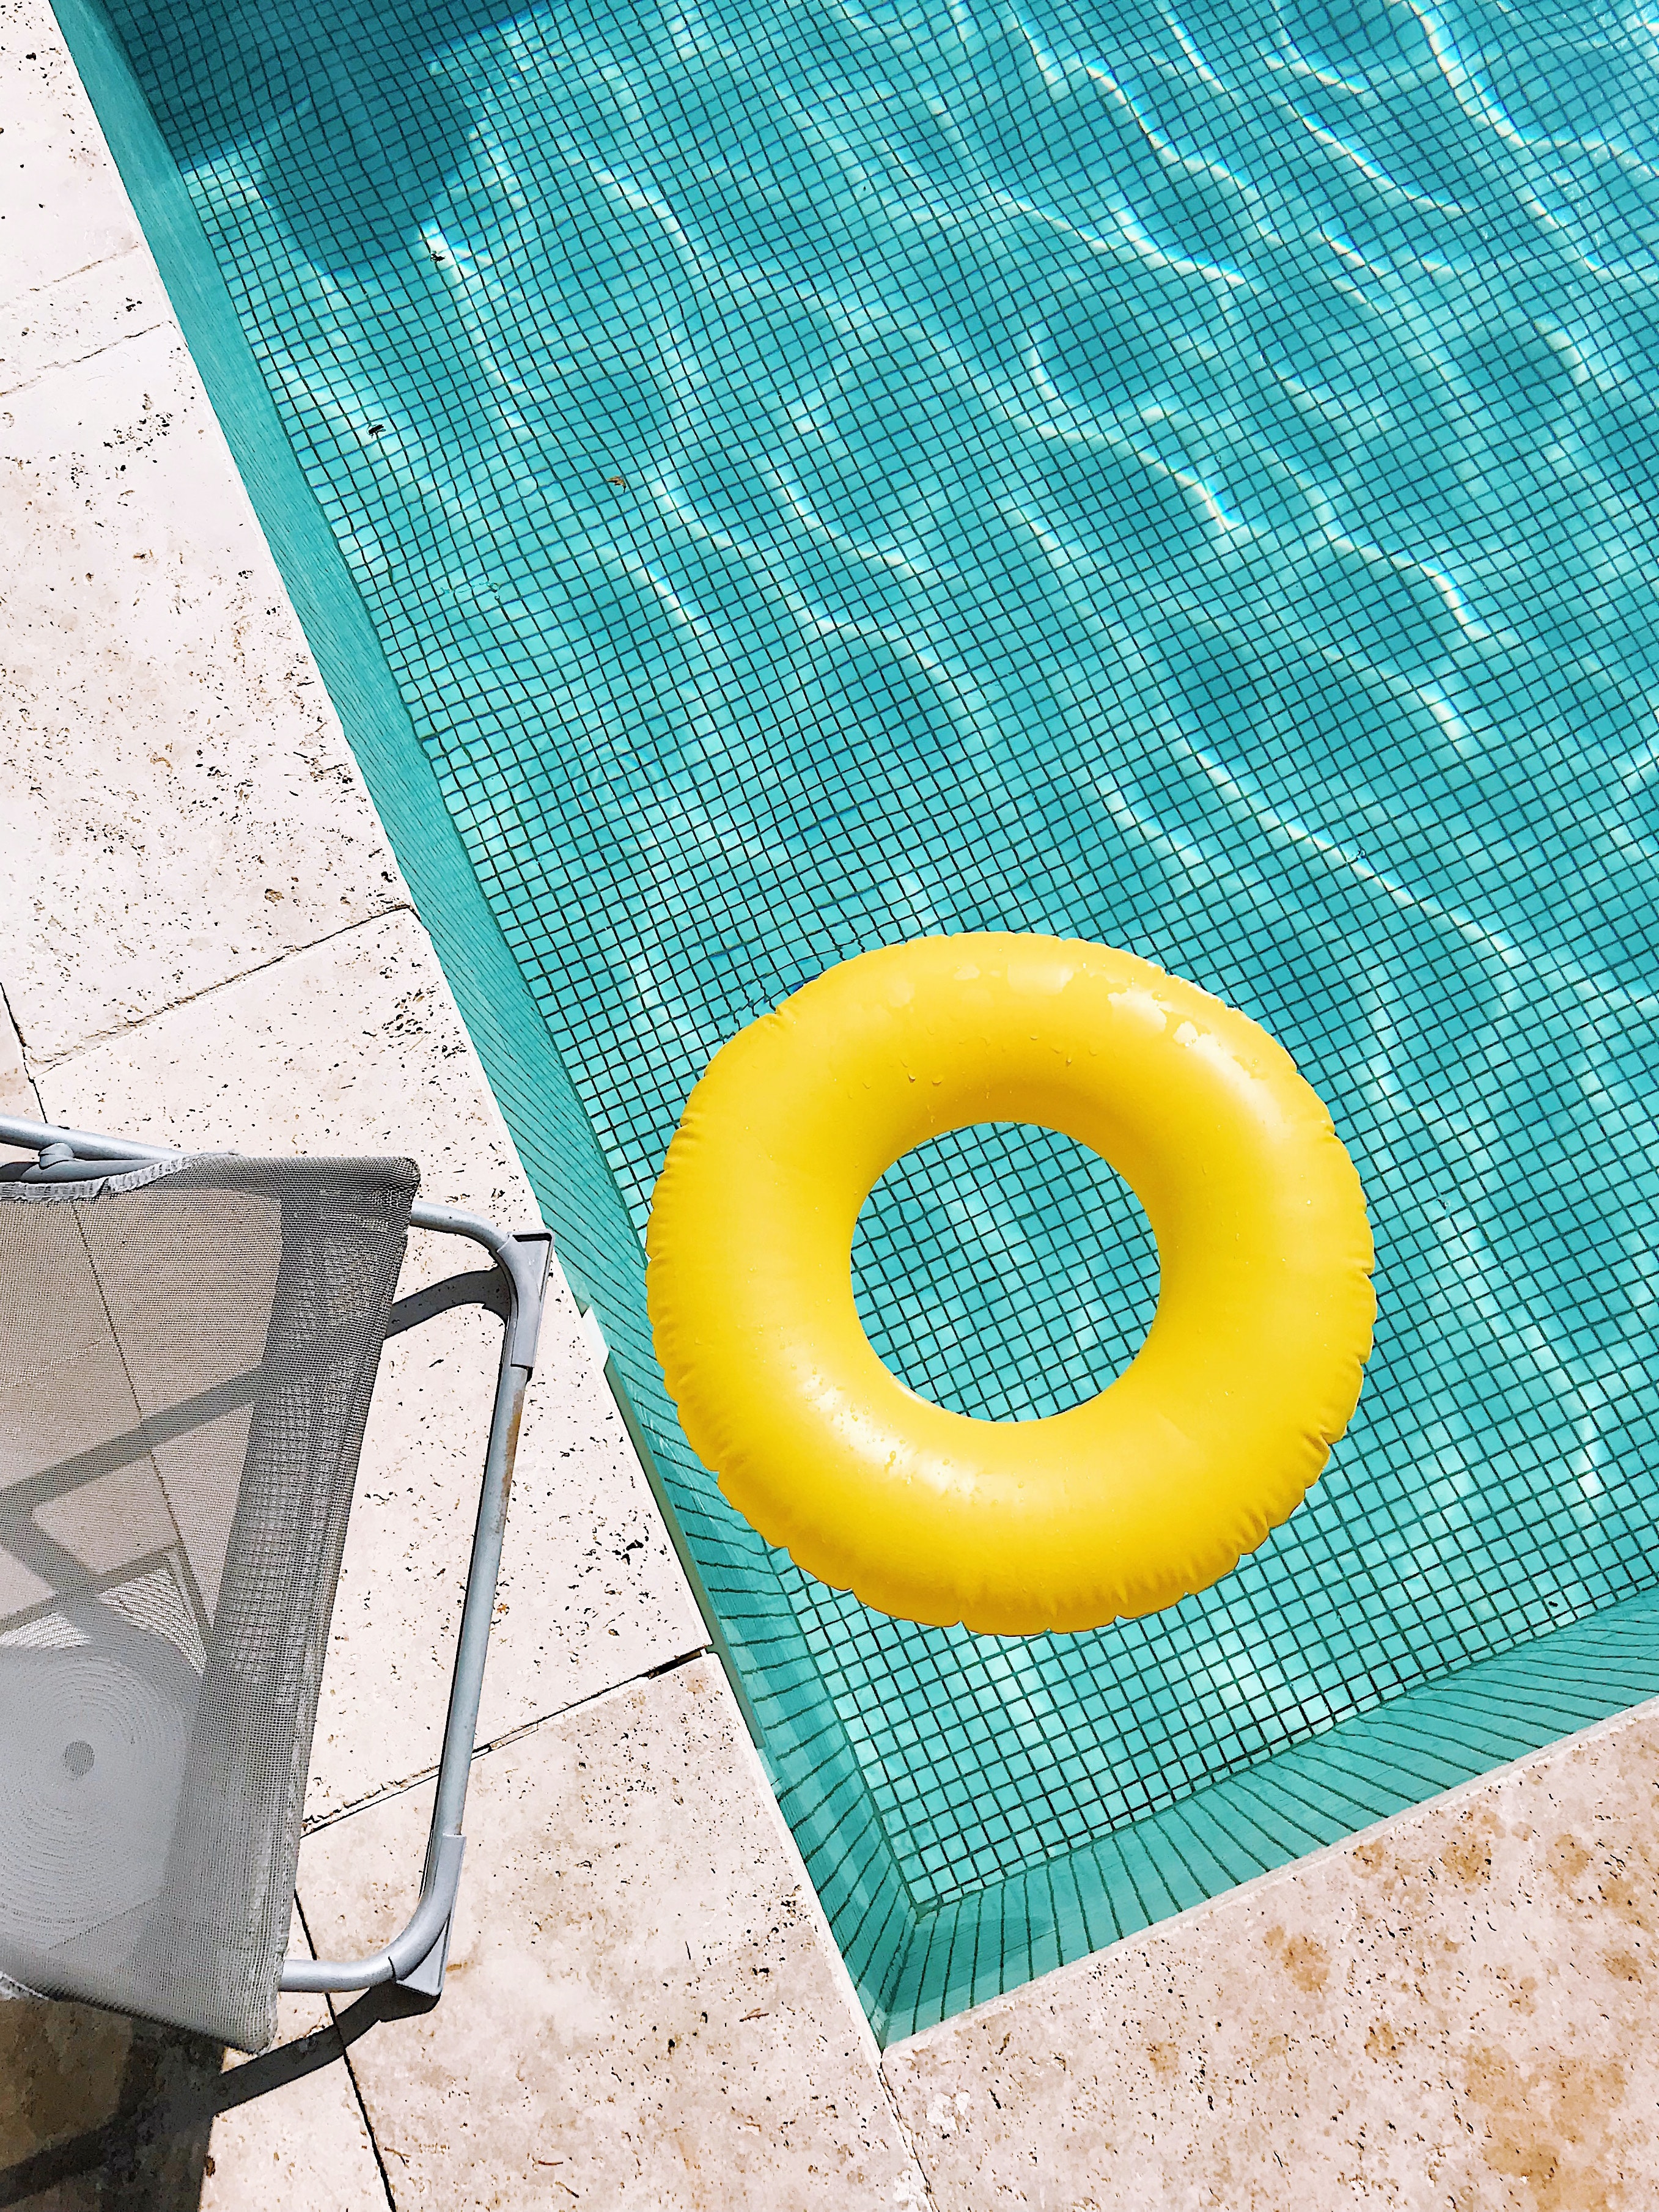 Image of a pool with a deckchair on the left and a yellow ring floating in the pool